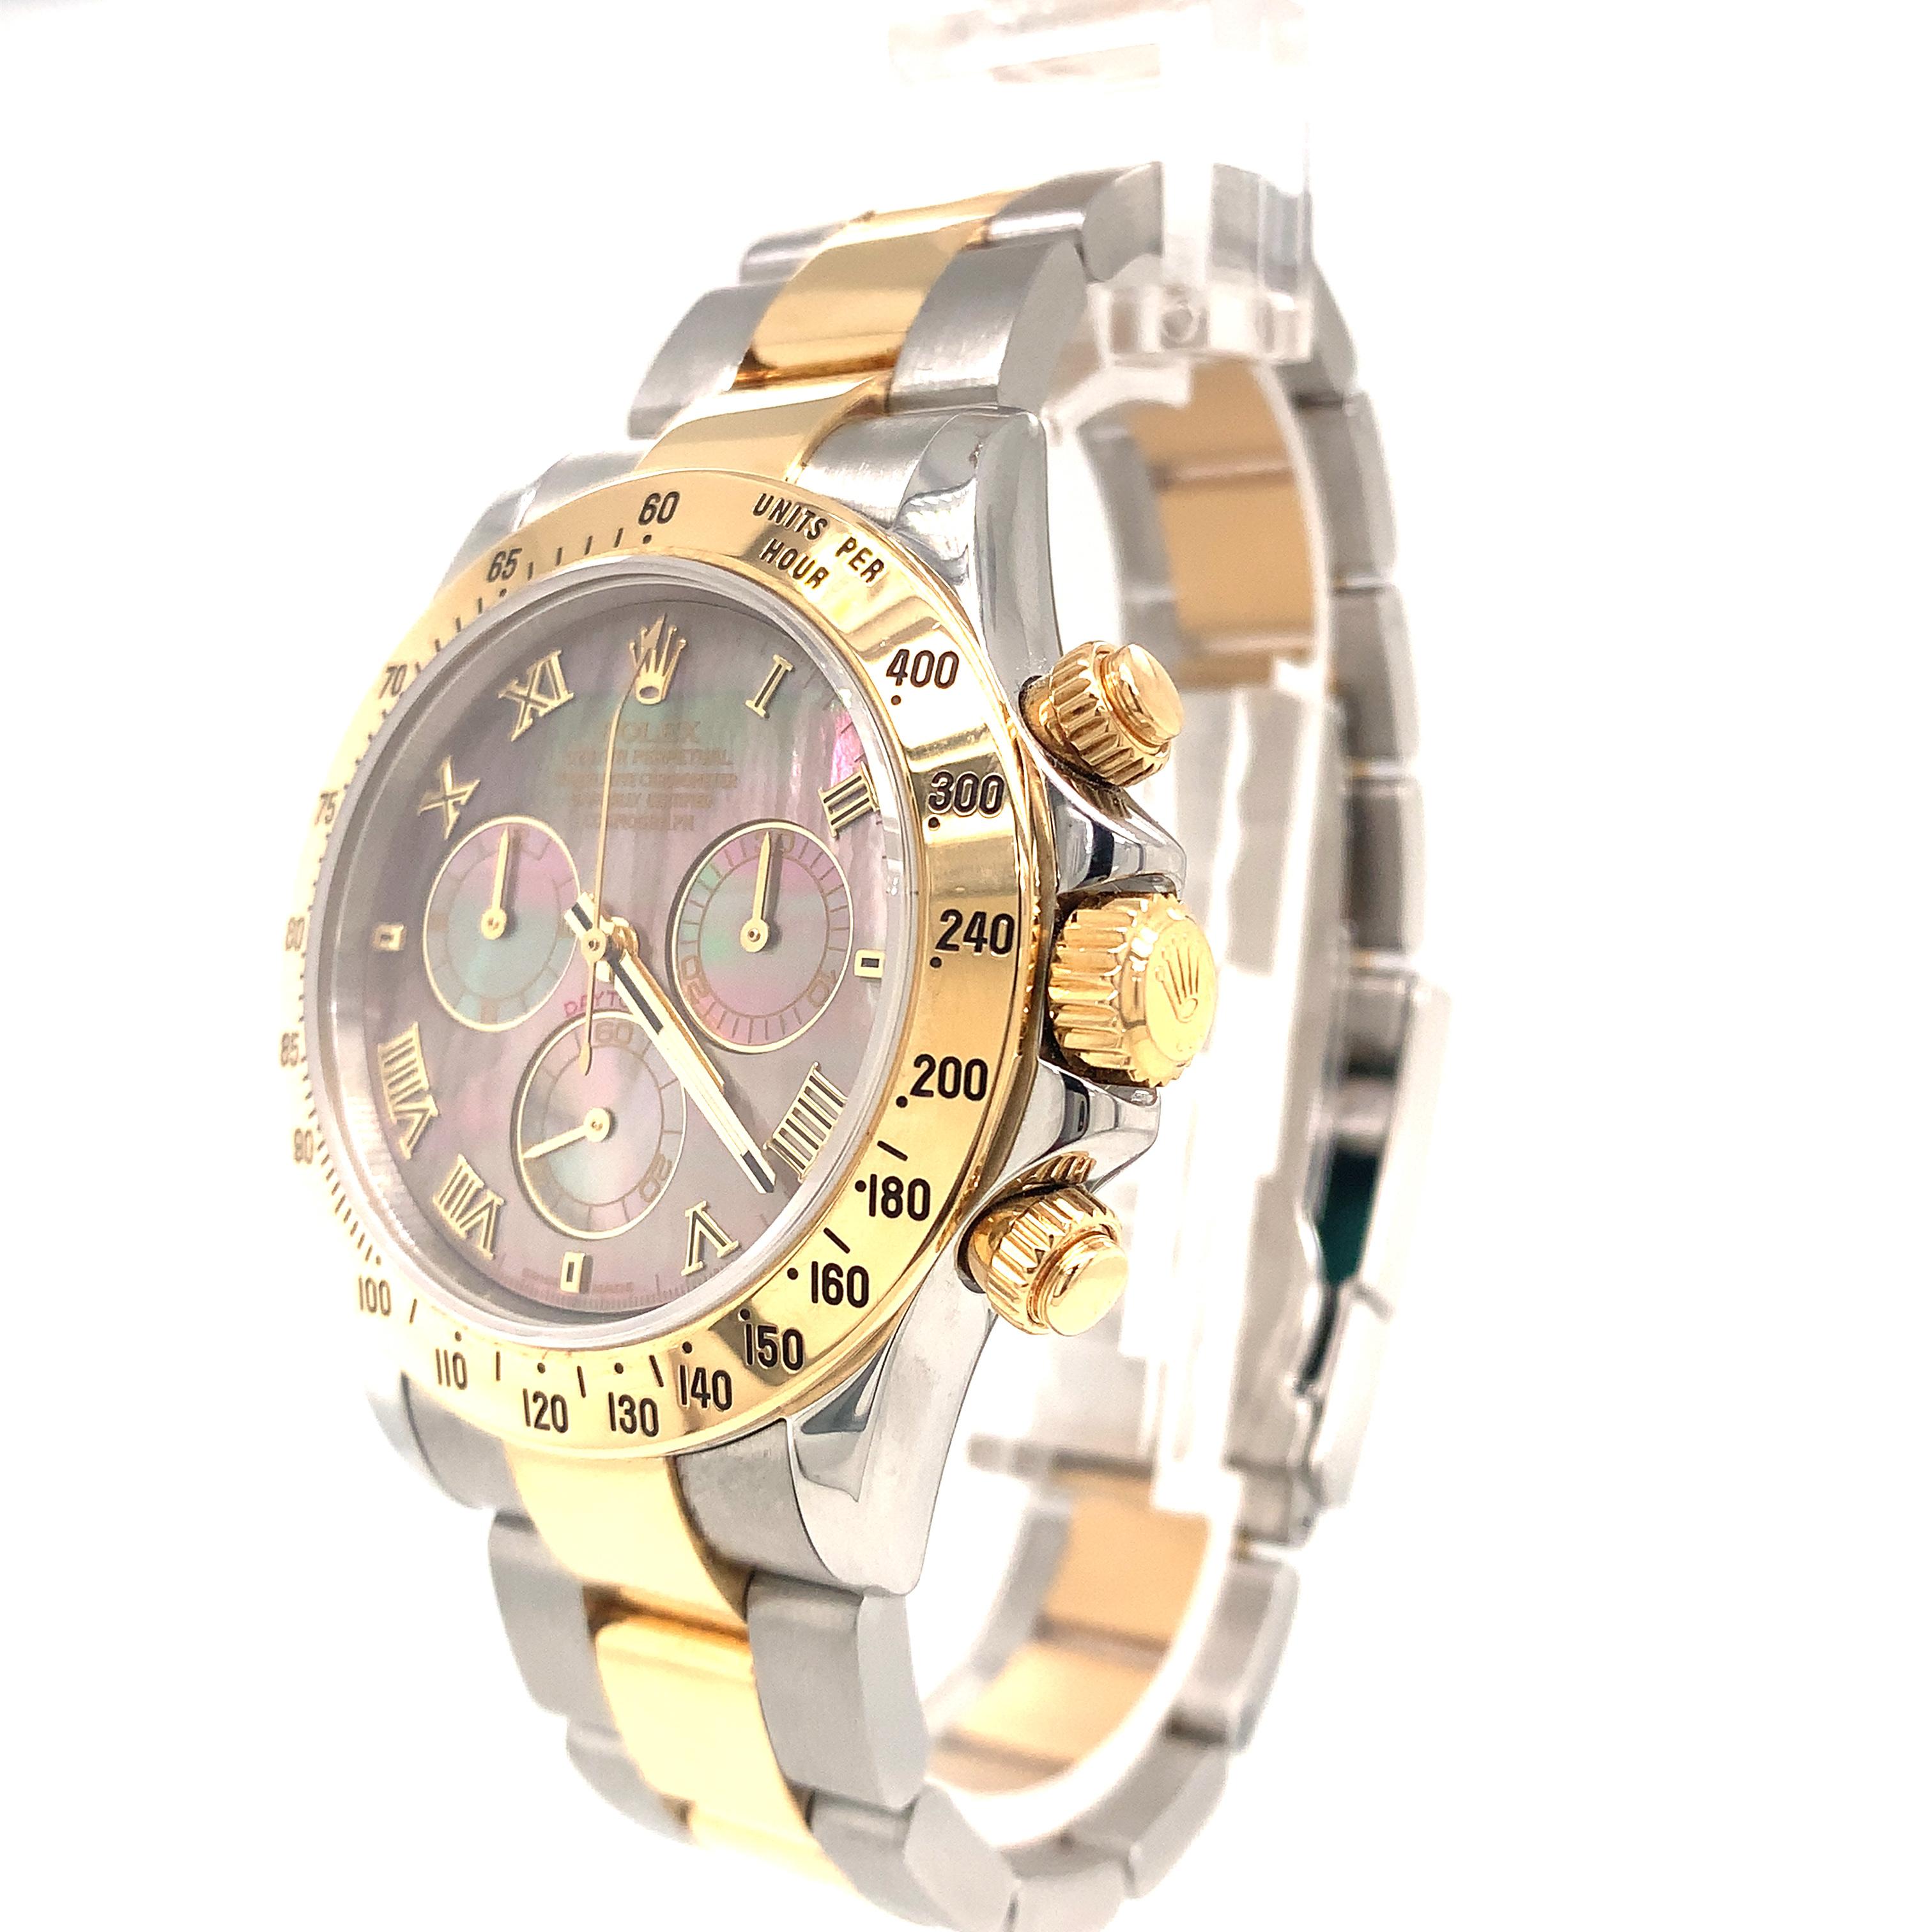 Rolex Daytona 116523 Stainless Steel 18k Yellow Gold  Mother of Pearl Dial 1